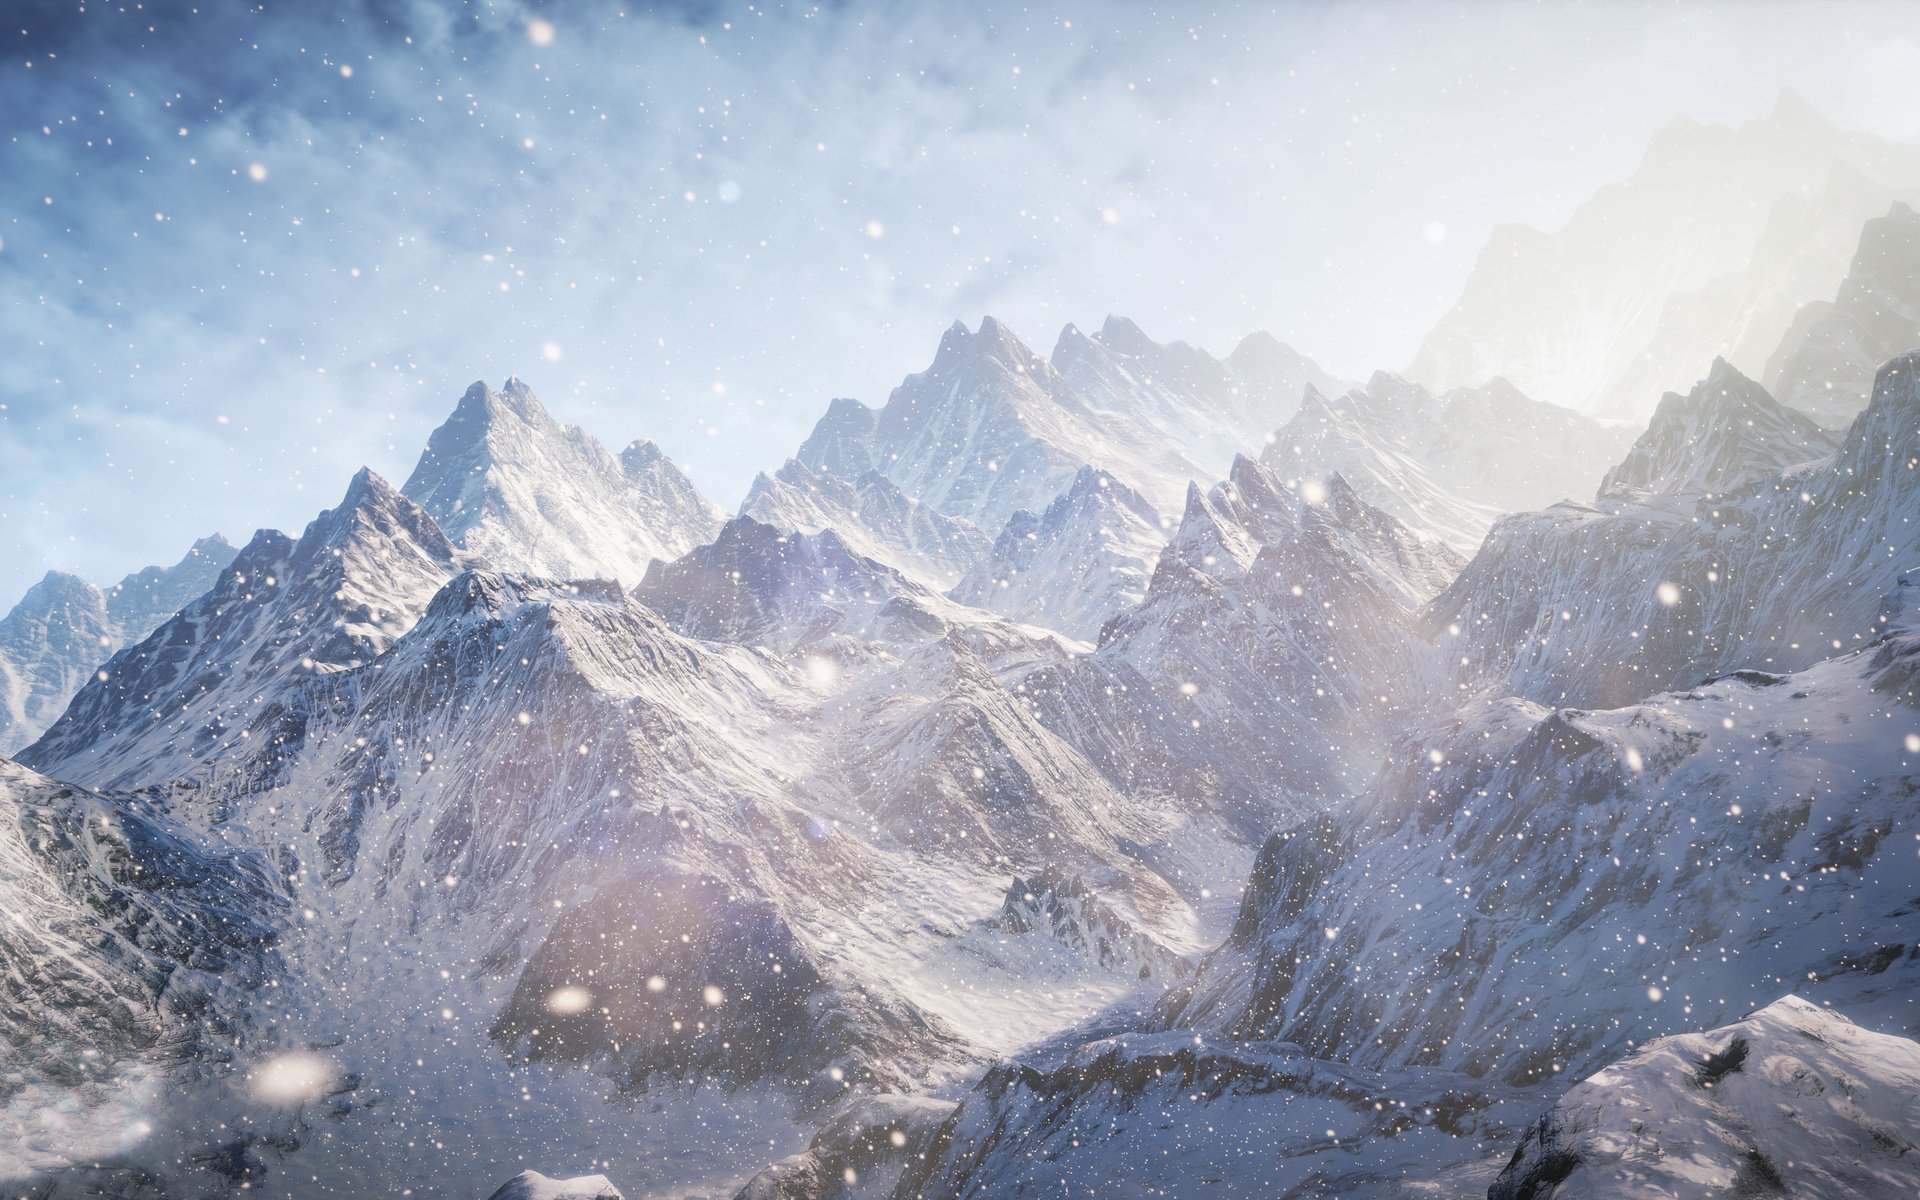 Unreal Engine Wallpapers